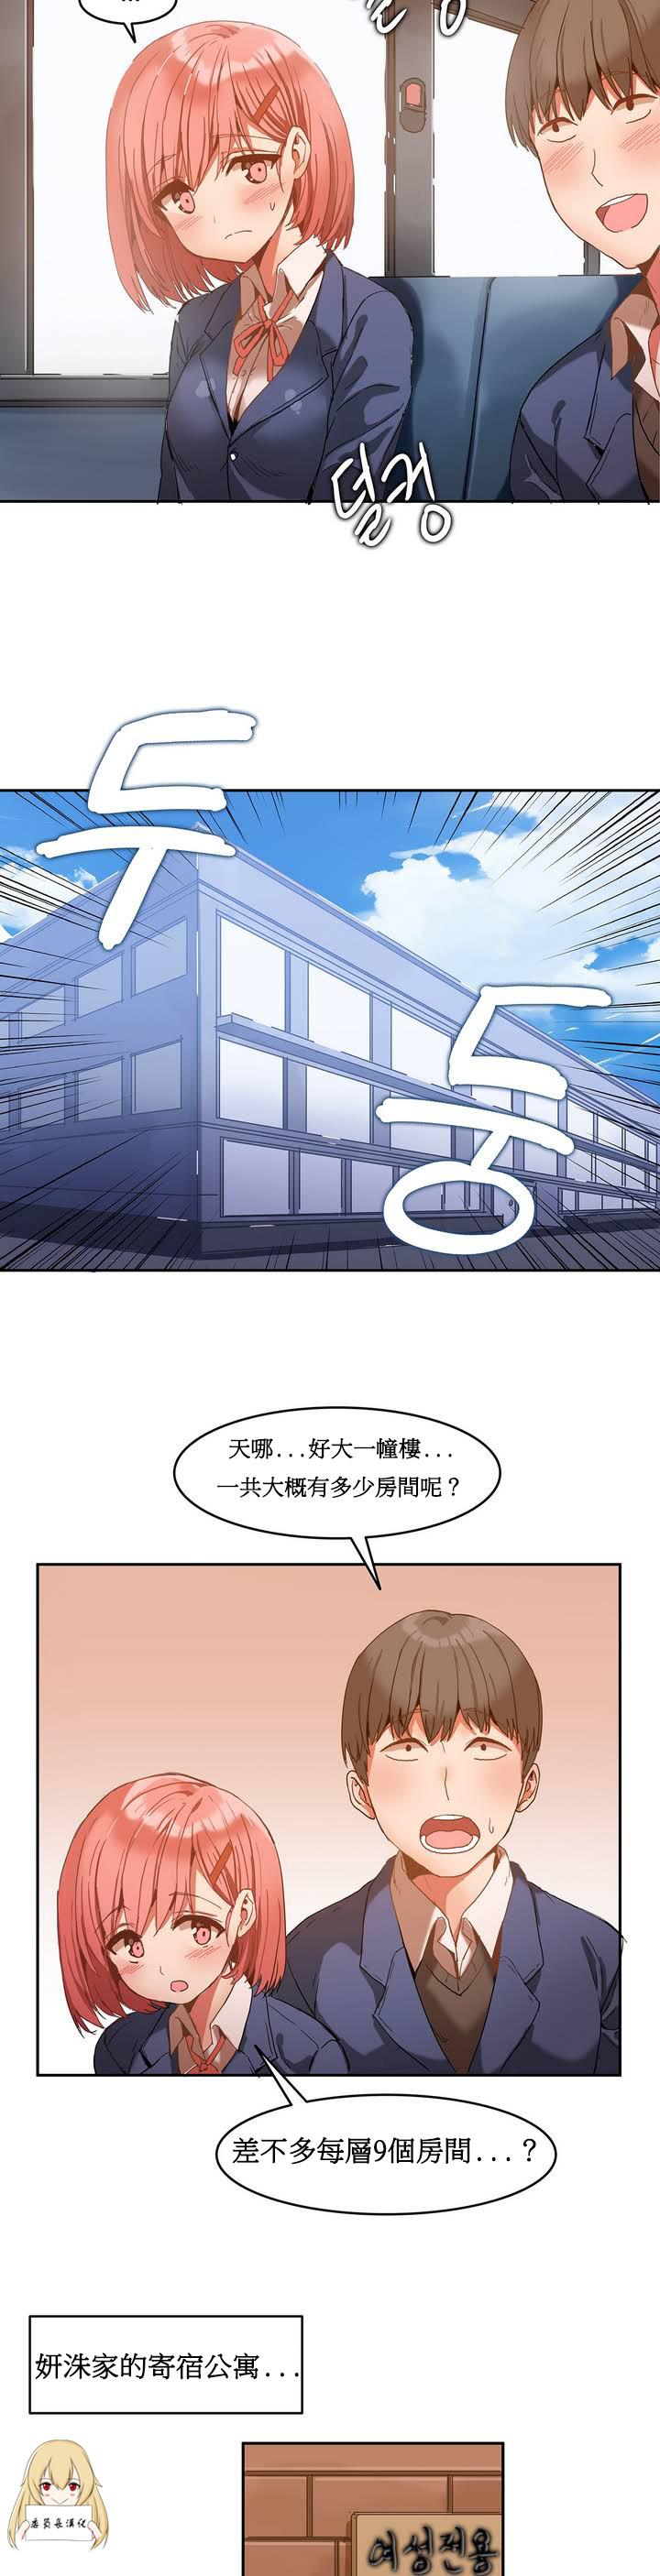 Chat Hahri's Lumpy Boardhouse Ch. 0~30【委員長個人漢化】（持續更新） Cdzinha - Page 11